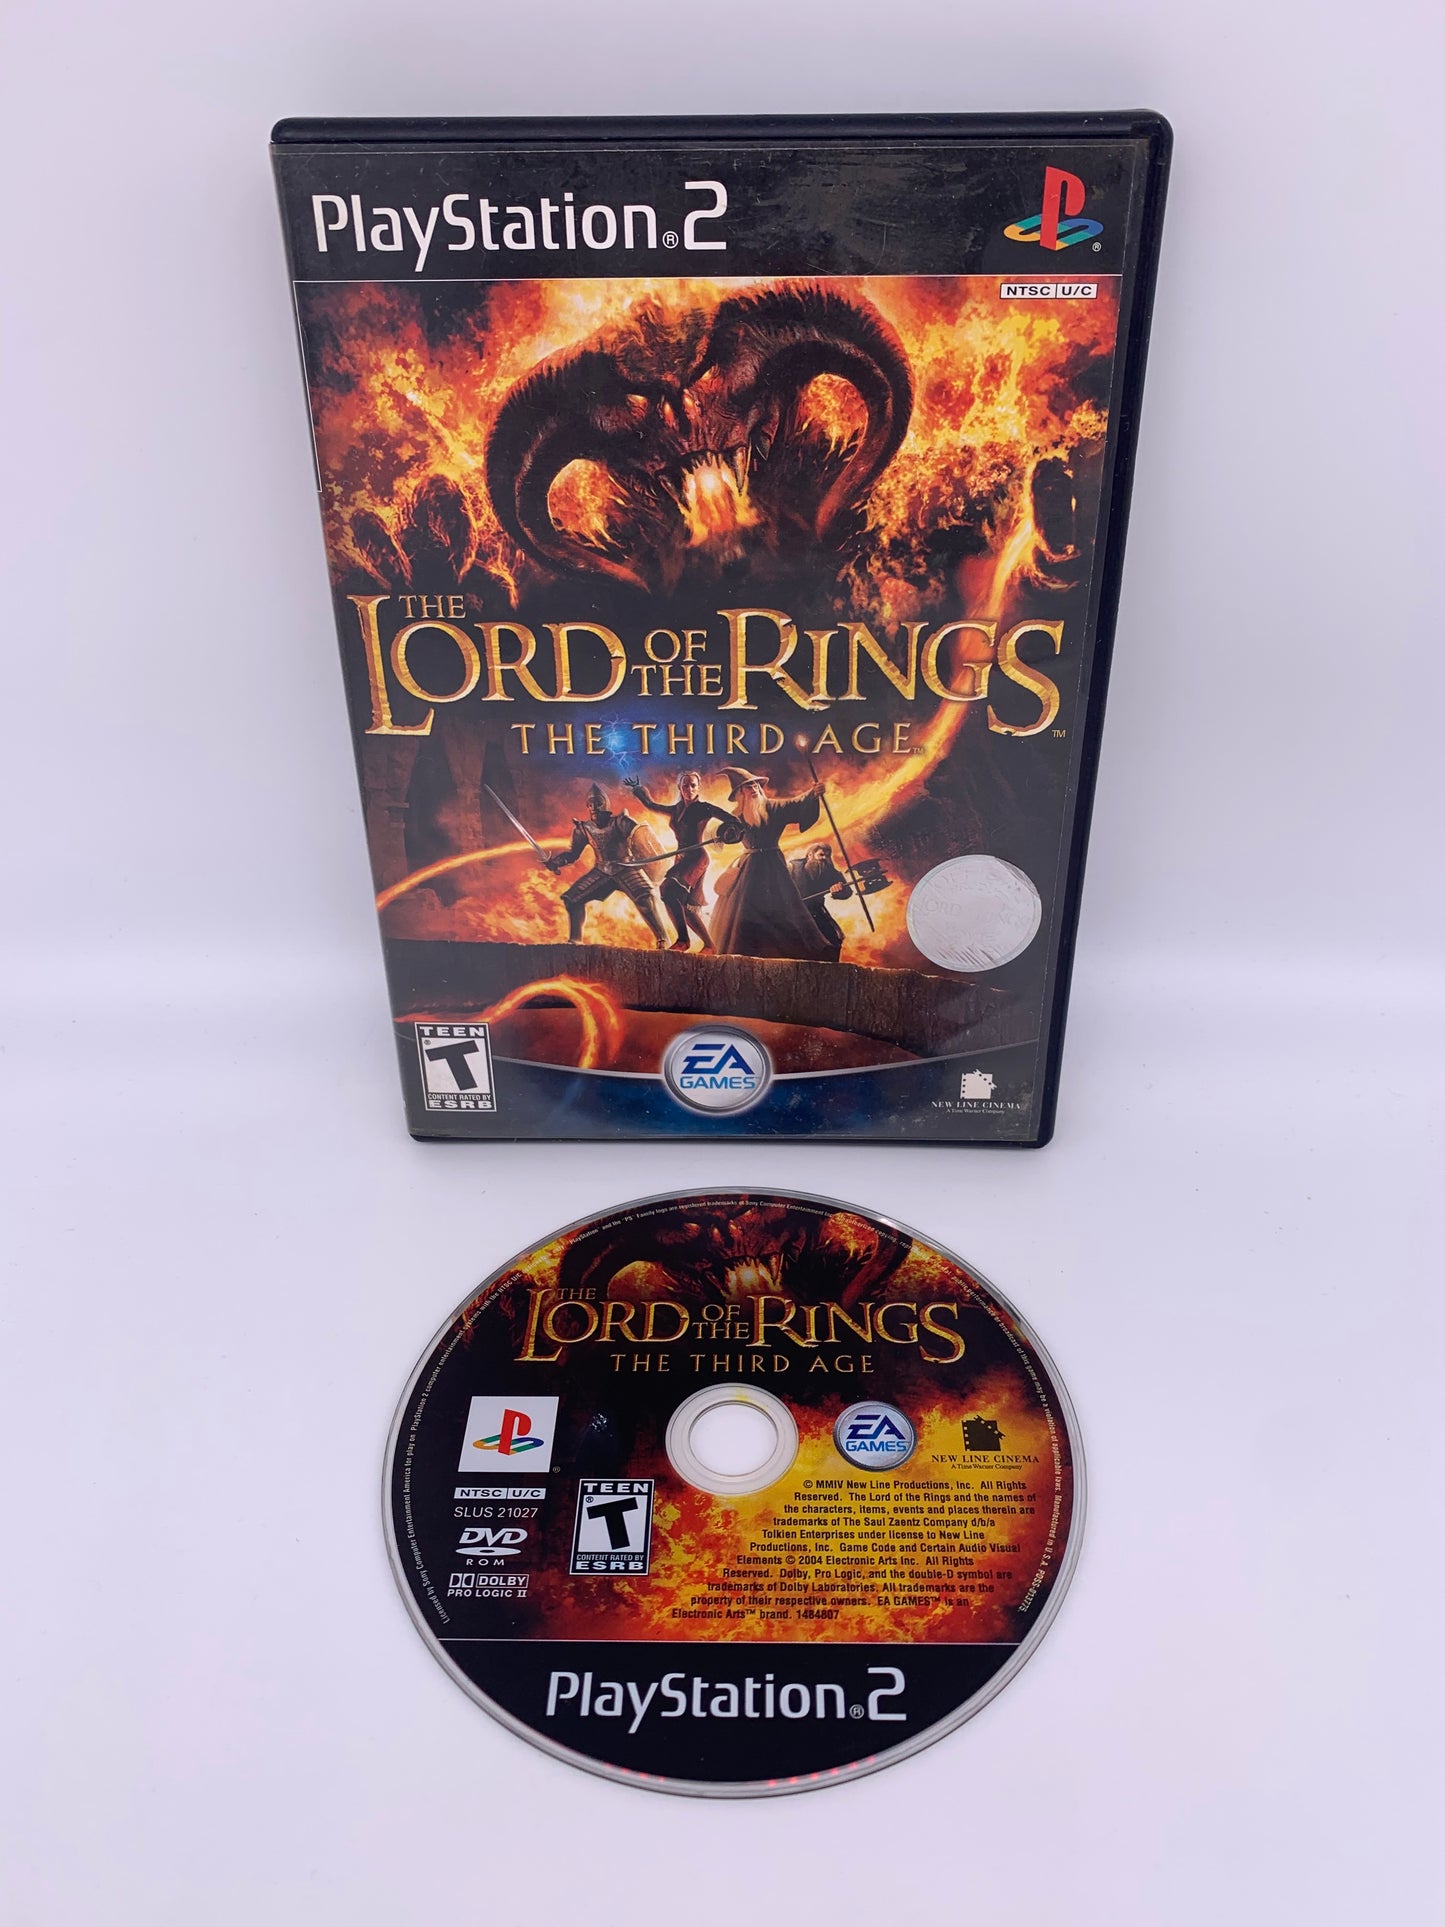 PiXEL-RETRO.COM : SONY PLAYSTATION 2 (PS2) COMPLET CIB BOX MANUAL GAME NTSC THE LORD OF THE RINGS THE THIRD AGE